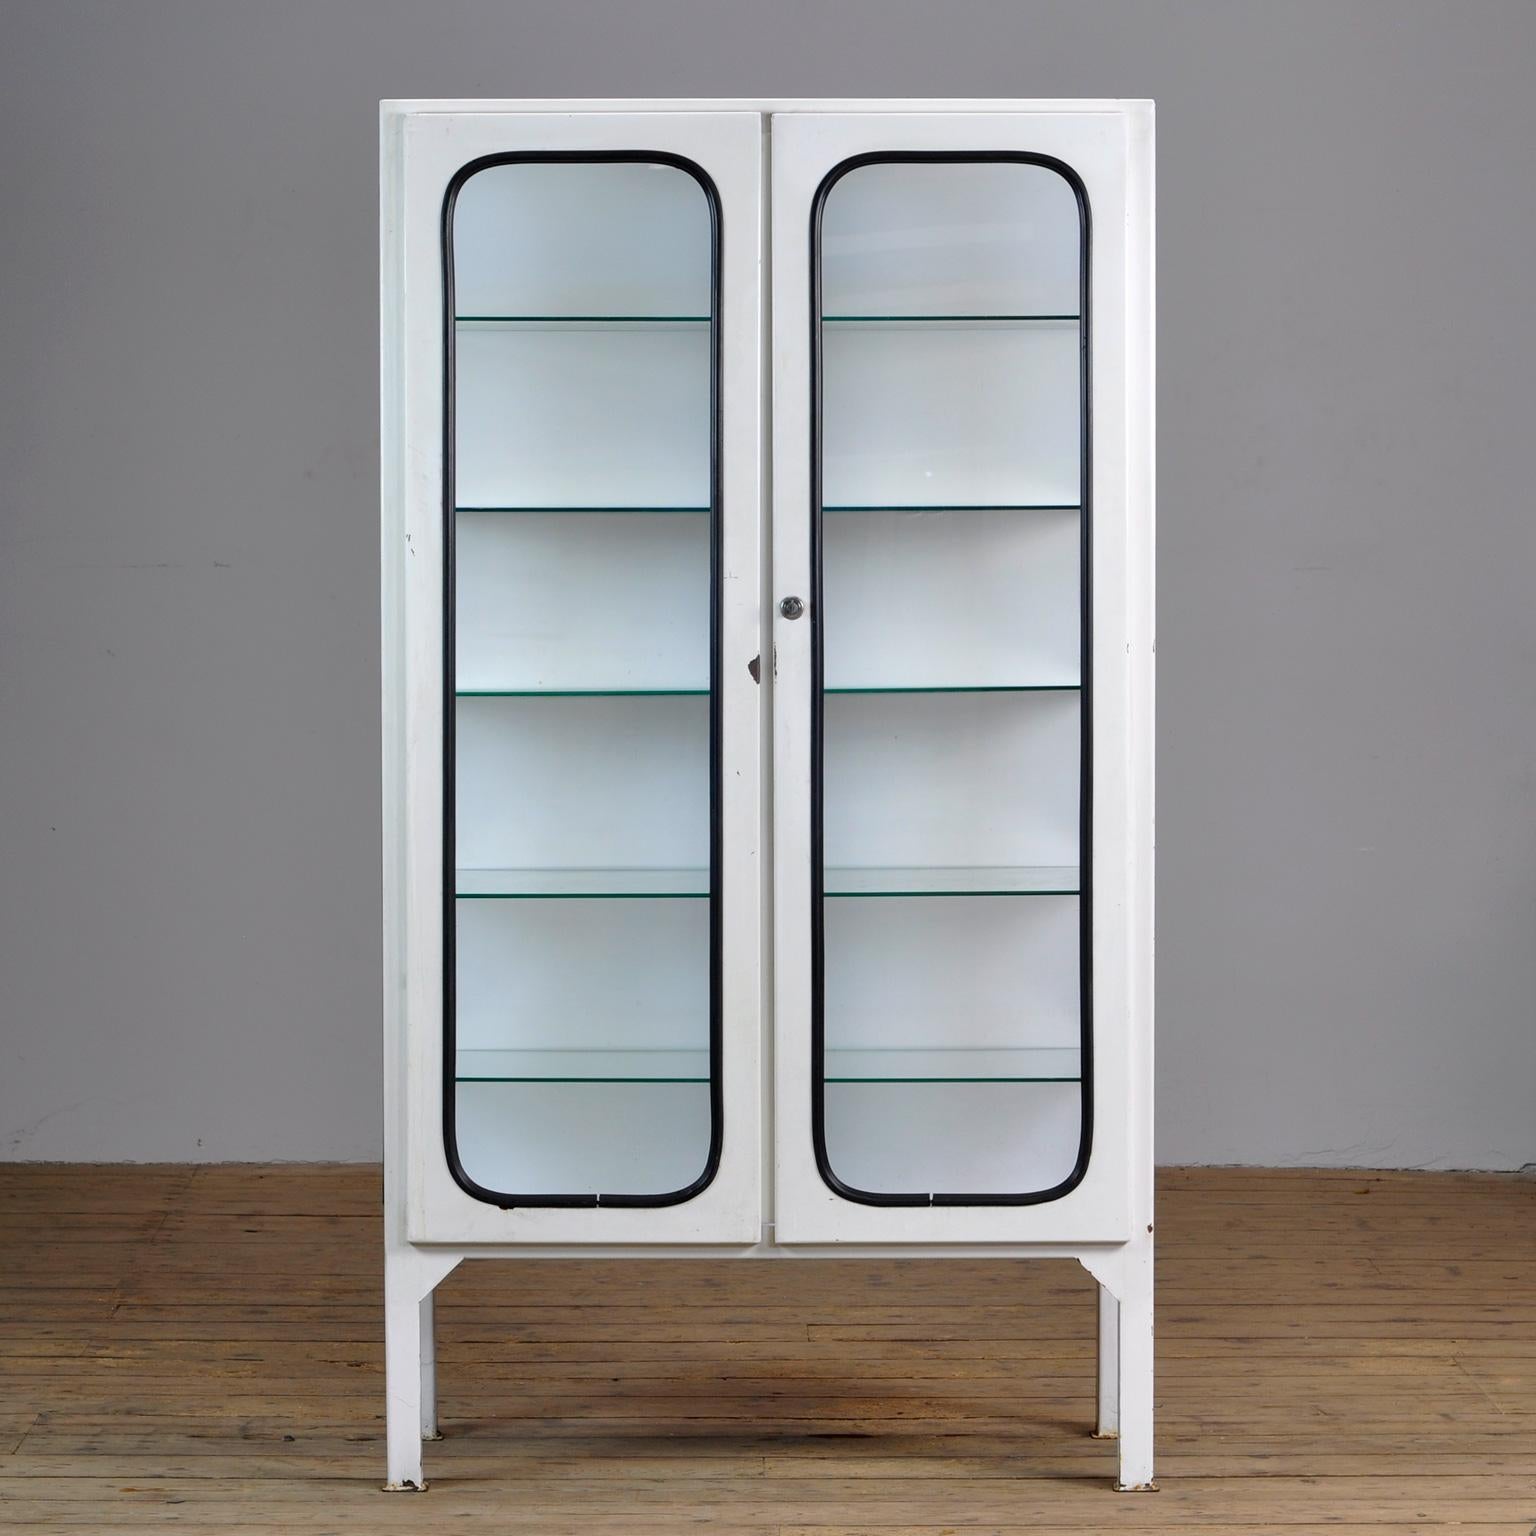 This medicine cabinet was designed in the 1970s and was produced circa 1975 in Hungary. It is made from iron and glass, and the glass is held by a black rubber strip. The cabinet features five adjustable glass shelves and a functioning lock.